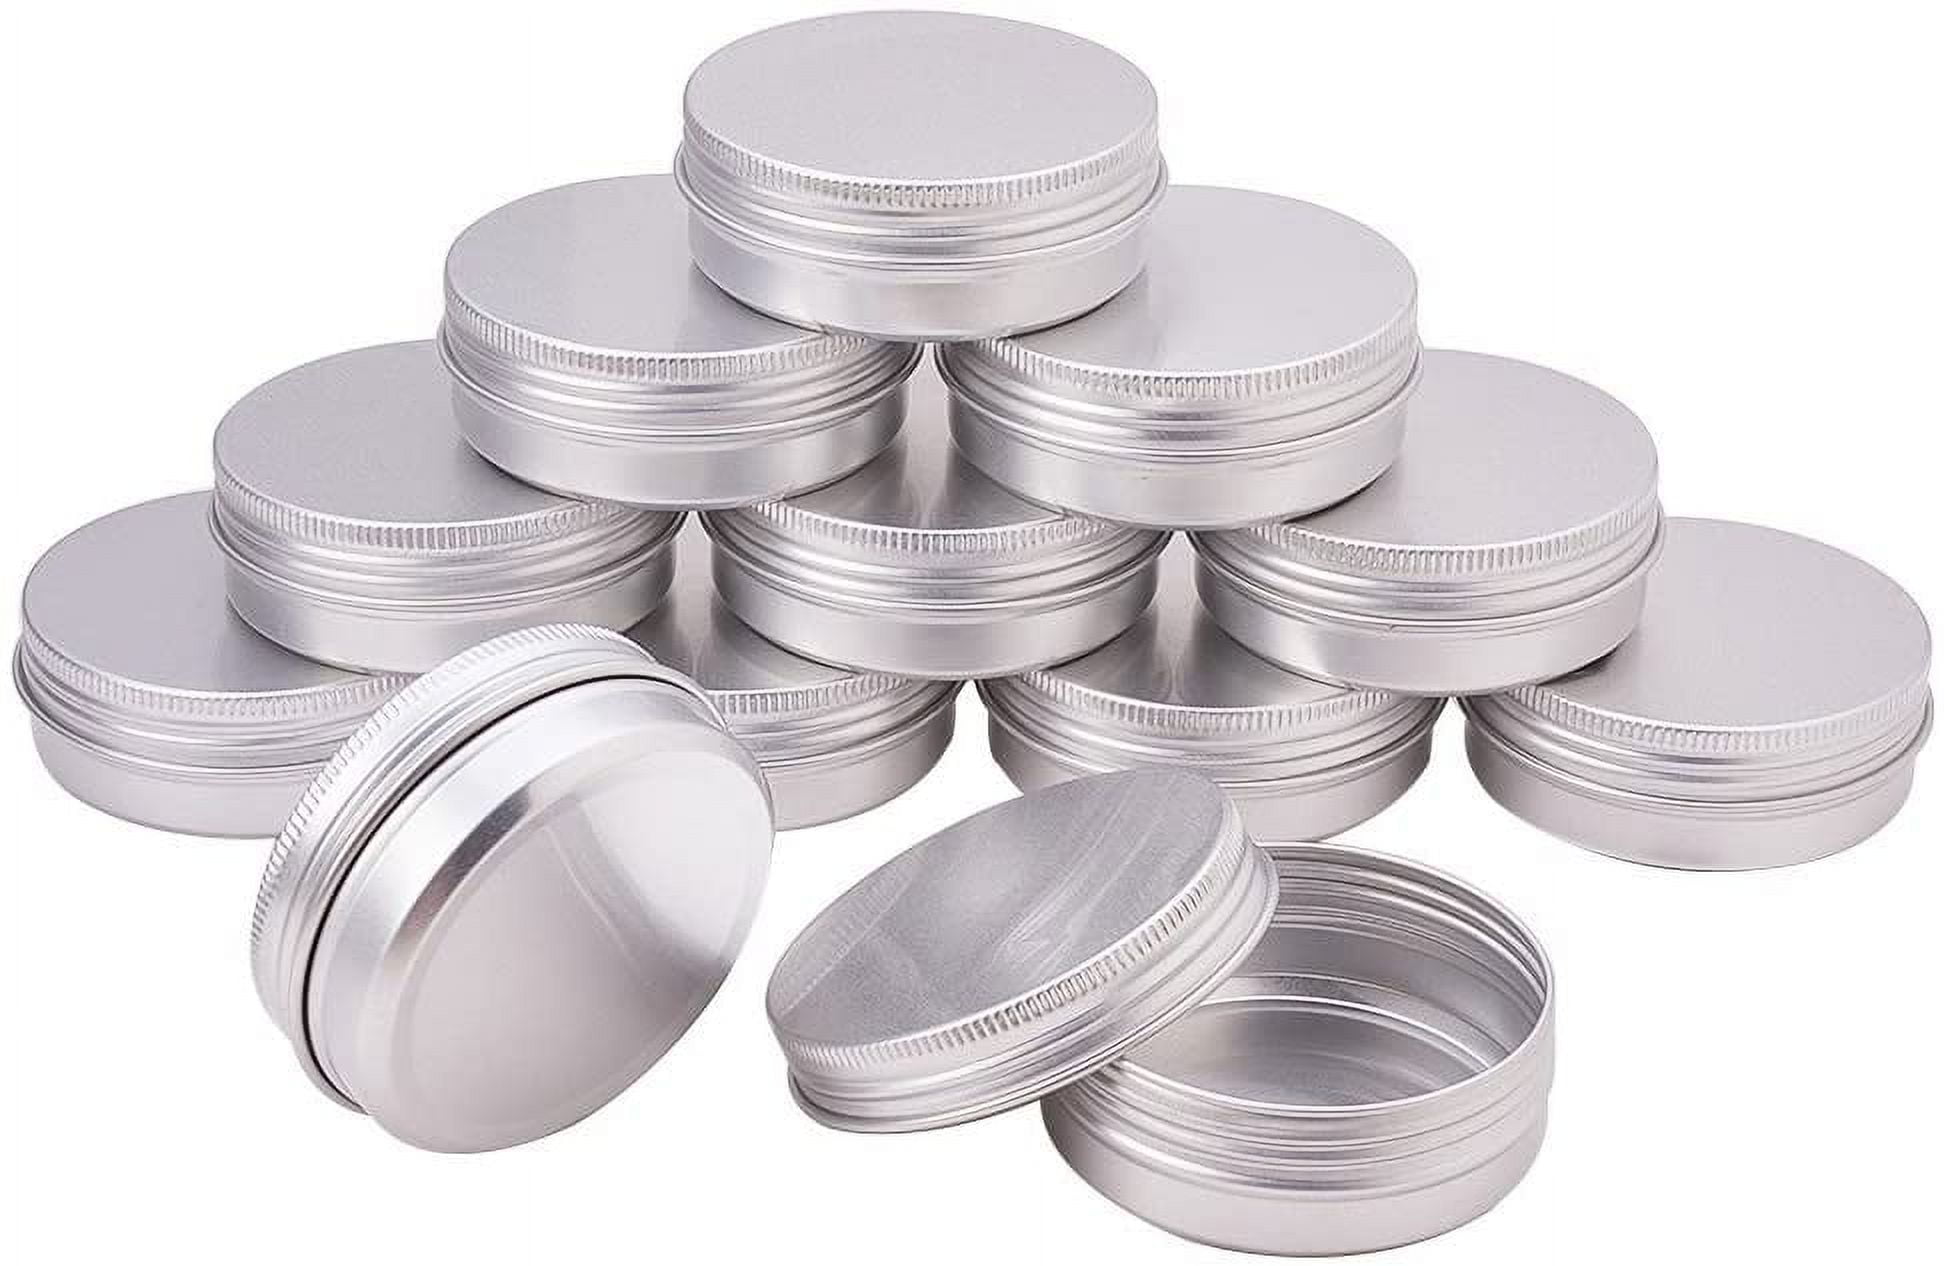  Foraineam 24 Pack 4 oz. Round Tin Cans Hair Wax Cream Lip Balm  Cosmetic Sample Container Jars Candle Tea Spice Empty Travel Tins with  Screw Lid : Beauty & Personal Care